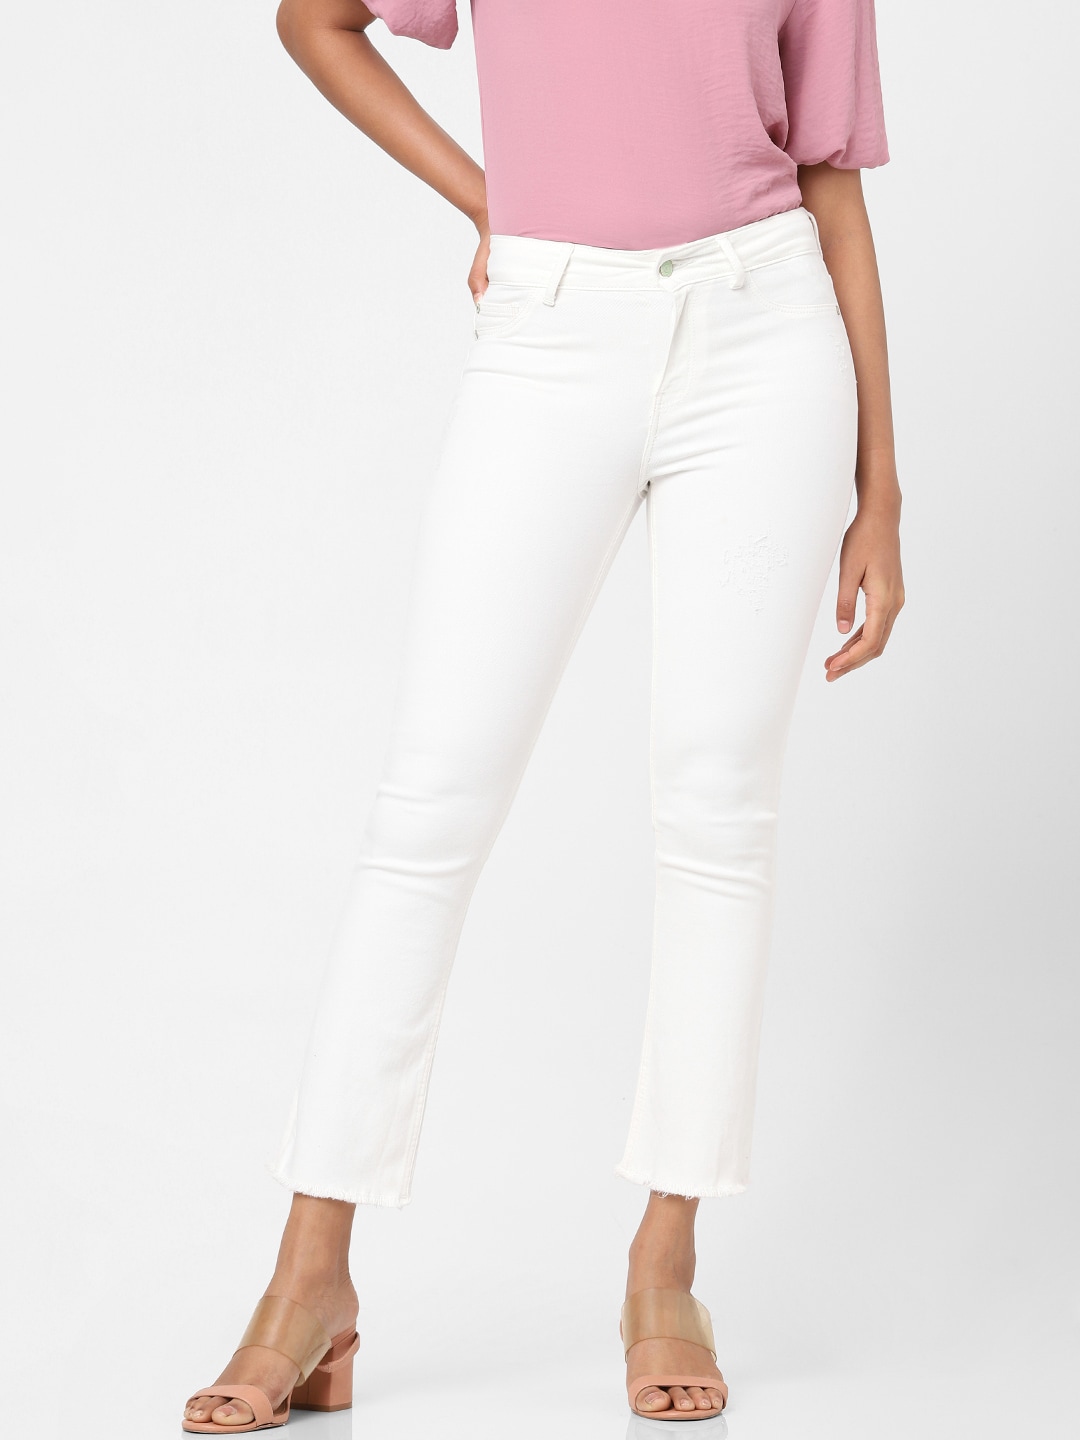 Vero Moda Women White Flared Mid-Rise Stretchable Jeans Price in India